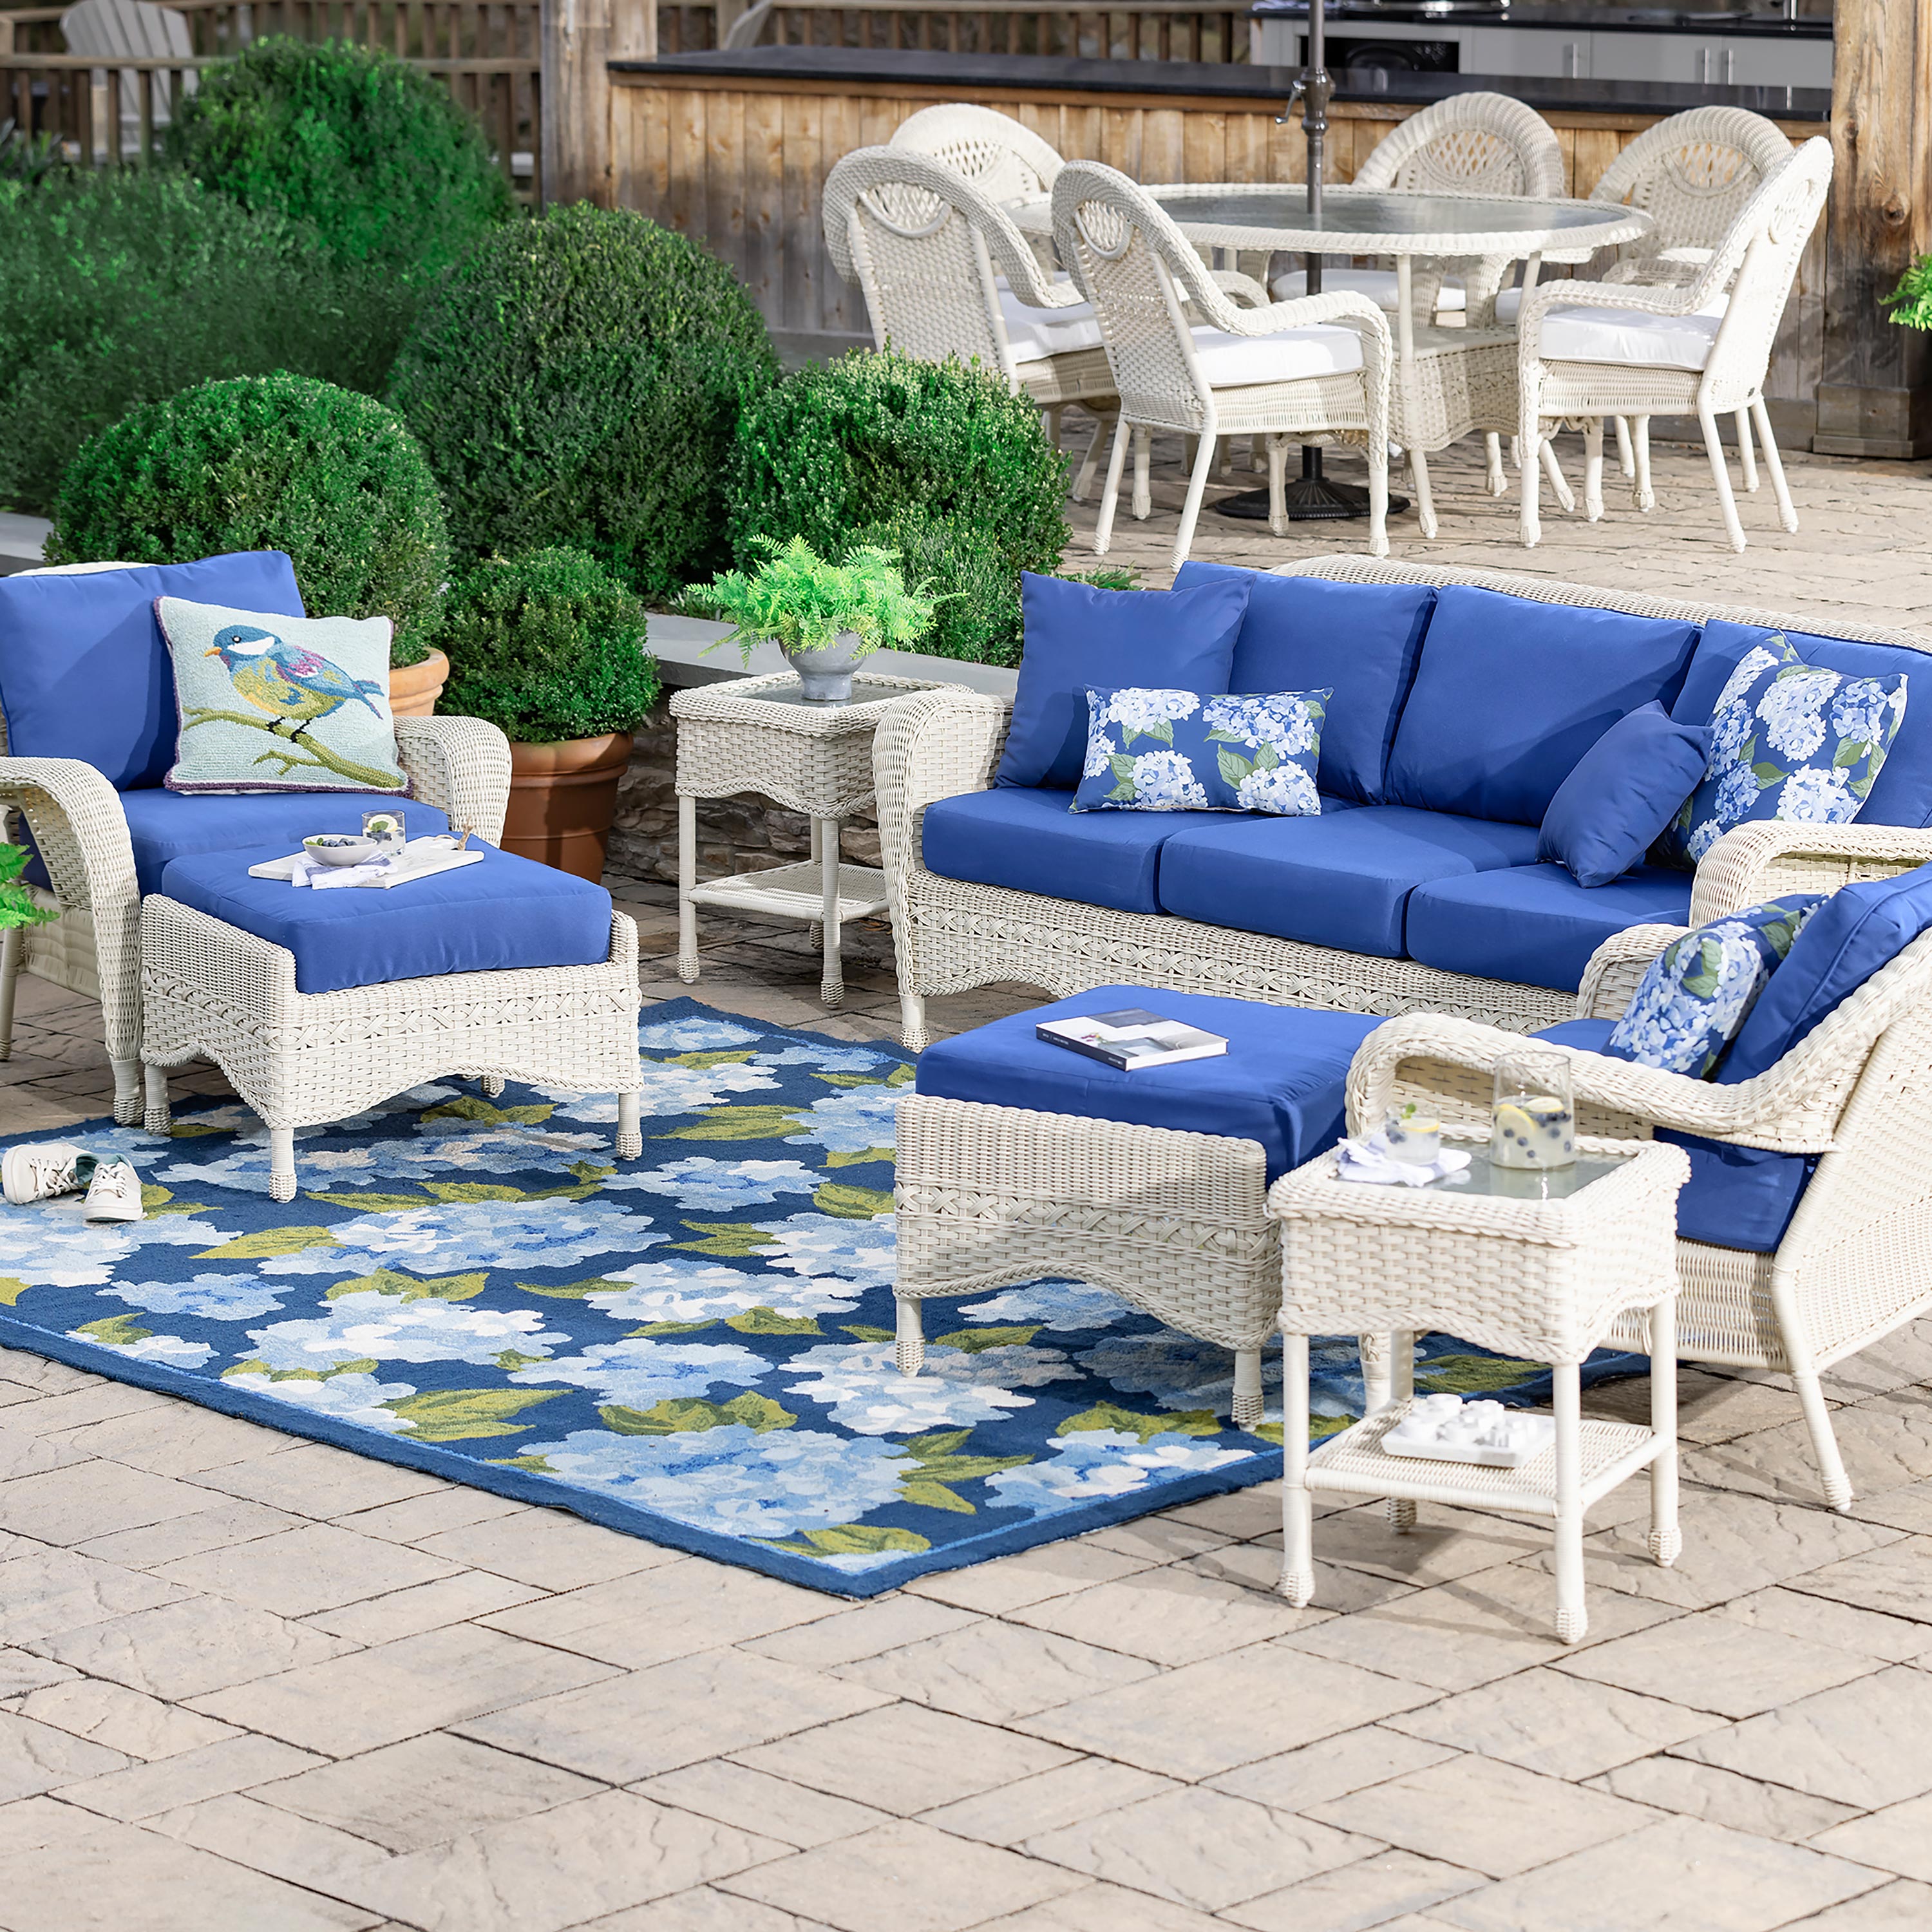 Prospect Hill Outdoor Wicker Deep Seating Sofa Set with Cushions